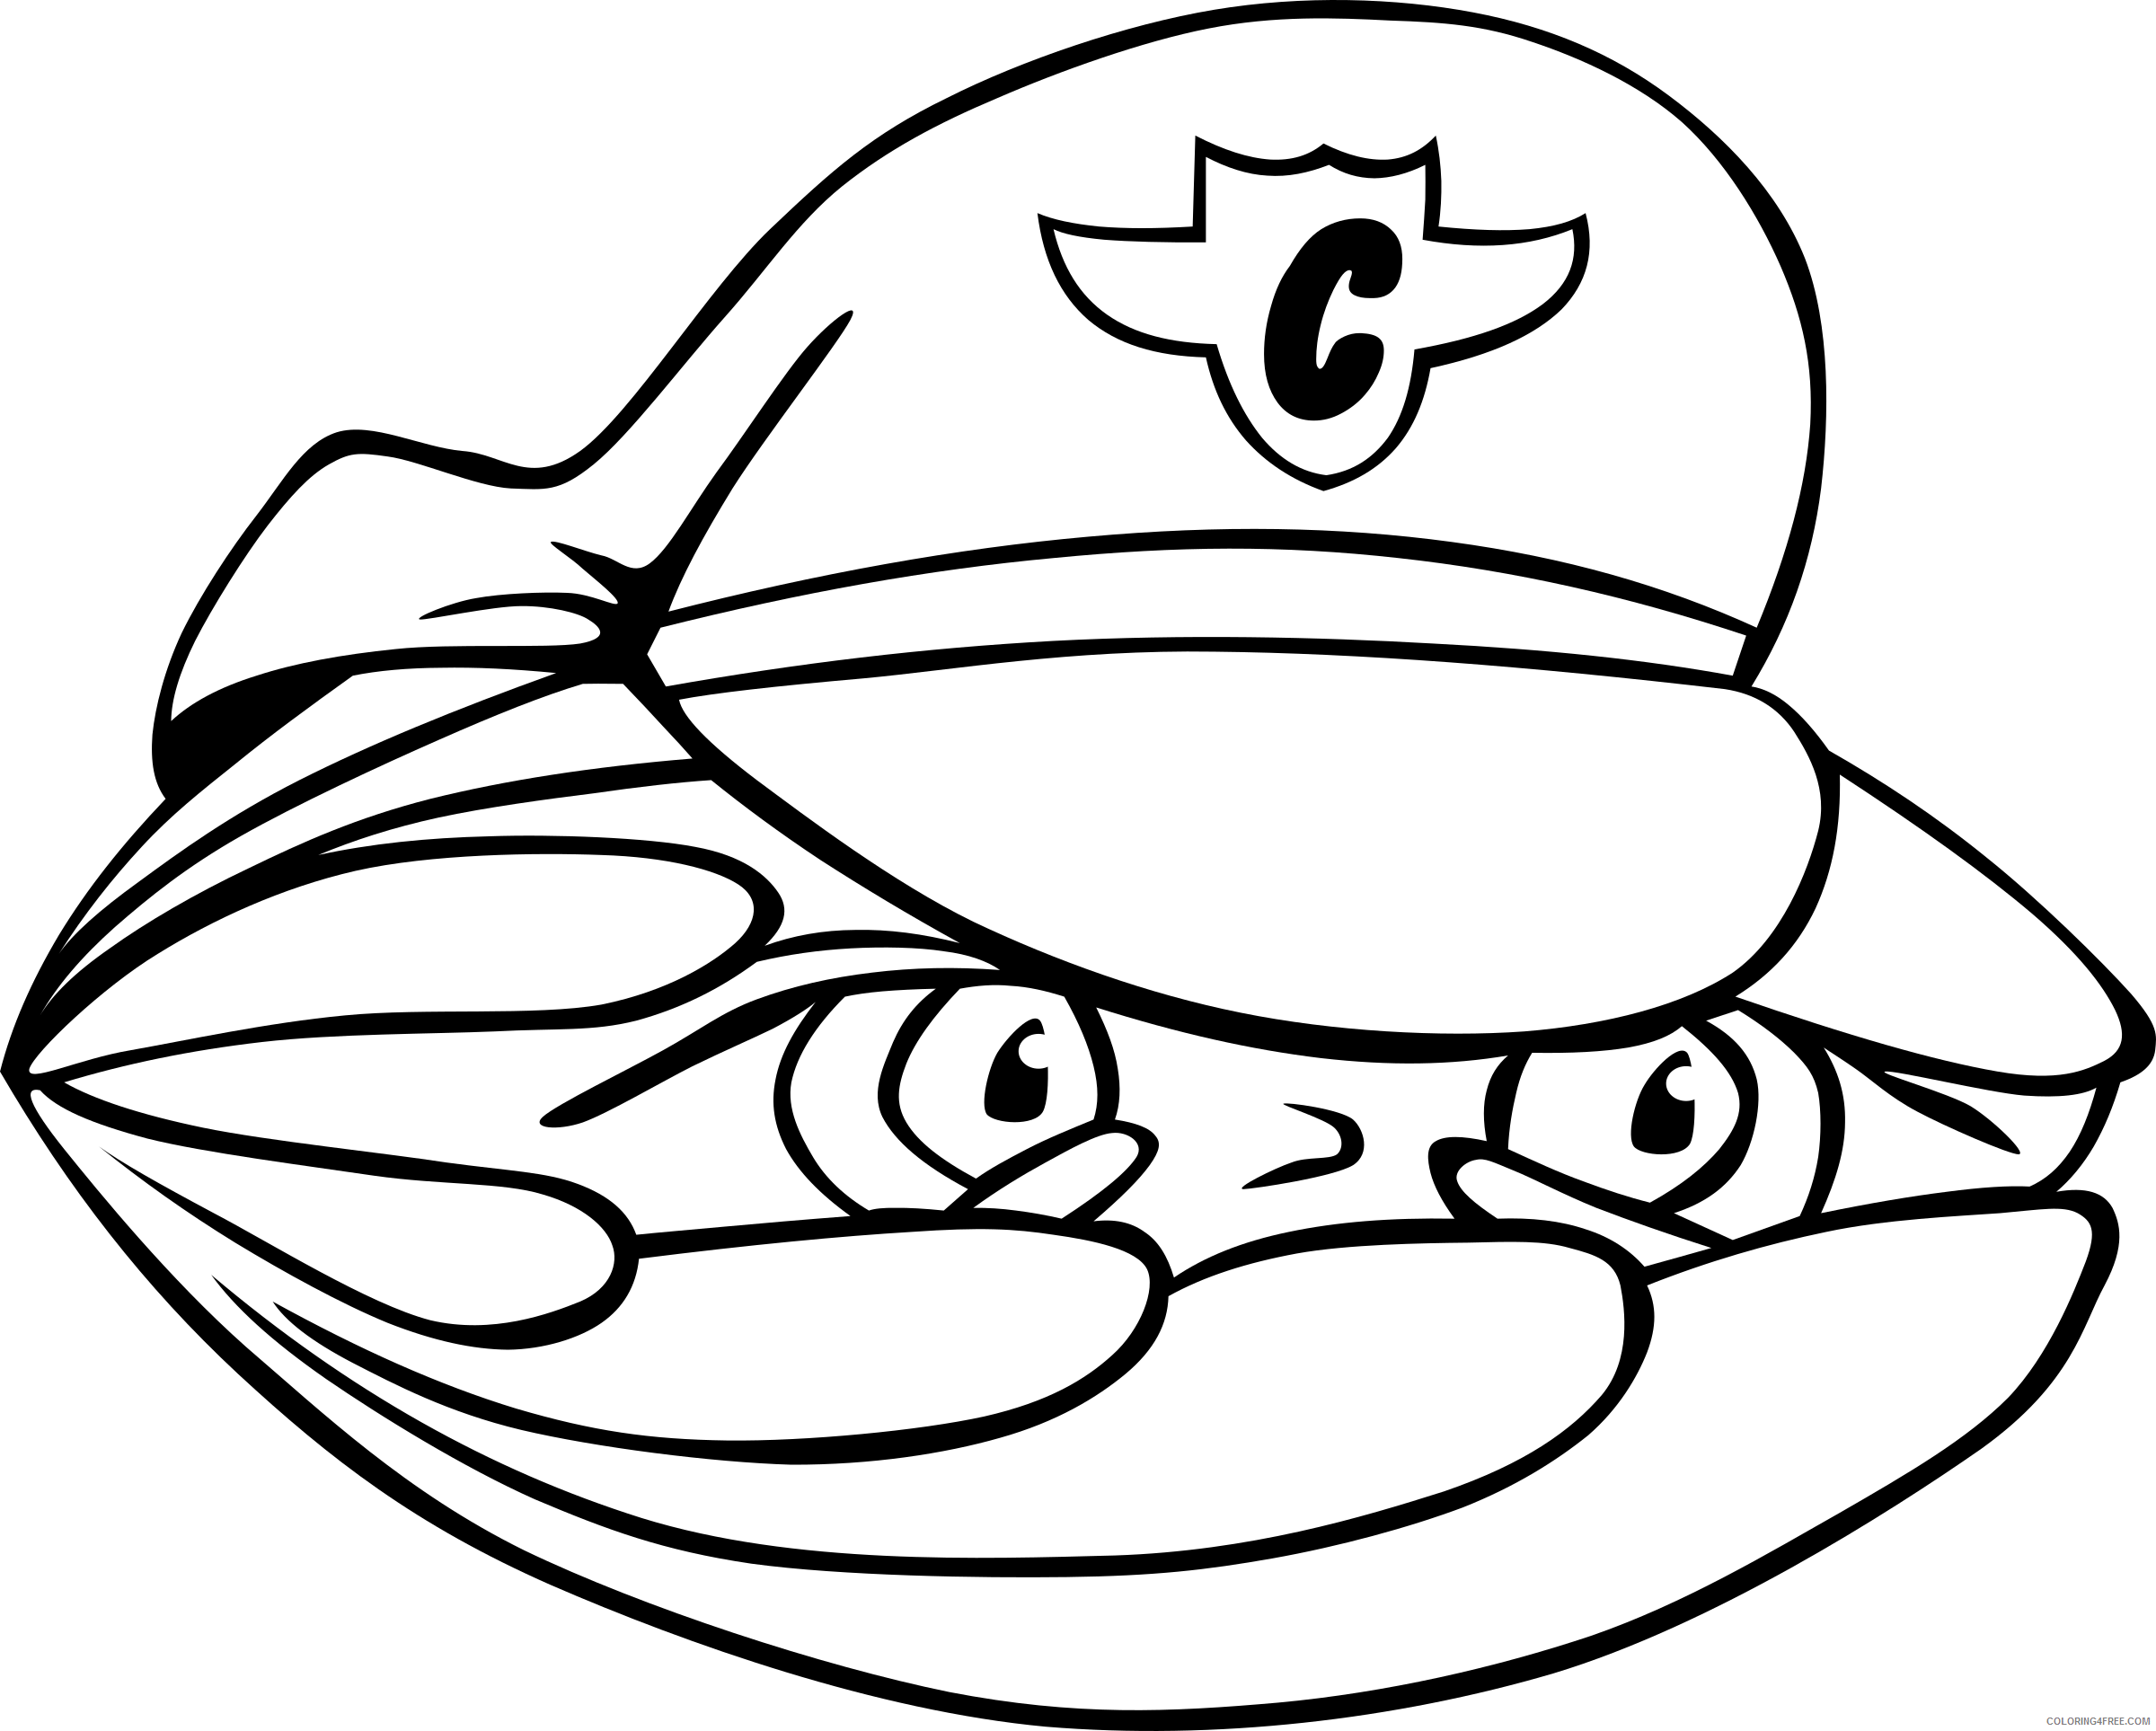 Clam Coloring Pages gerald g clam security guard Printable Coloring4free